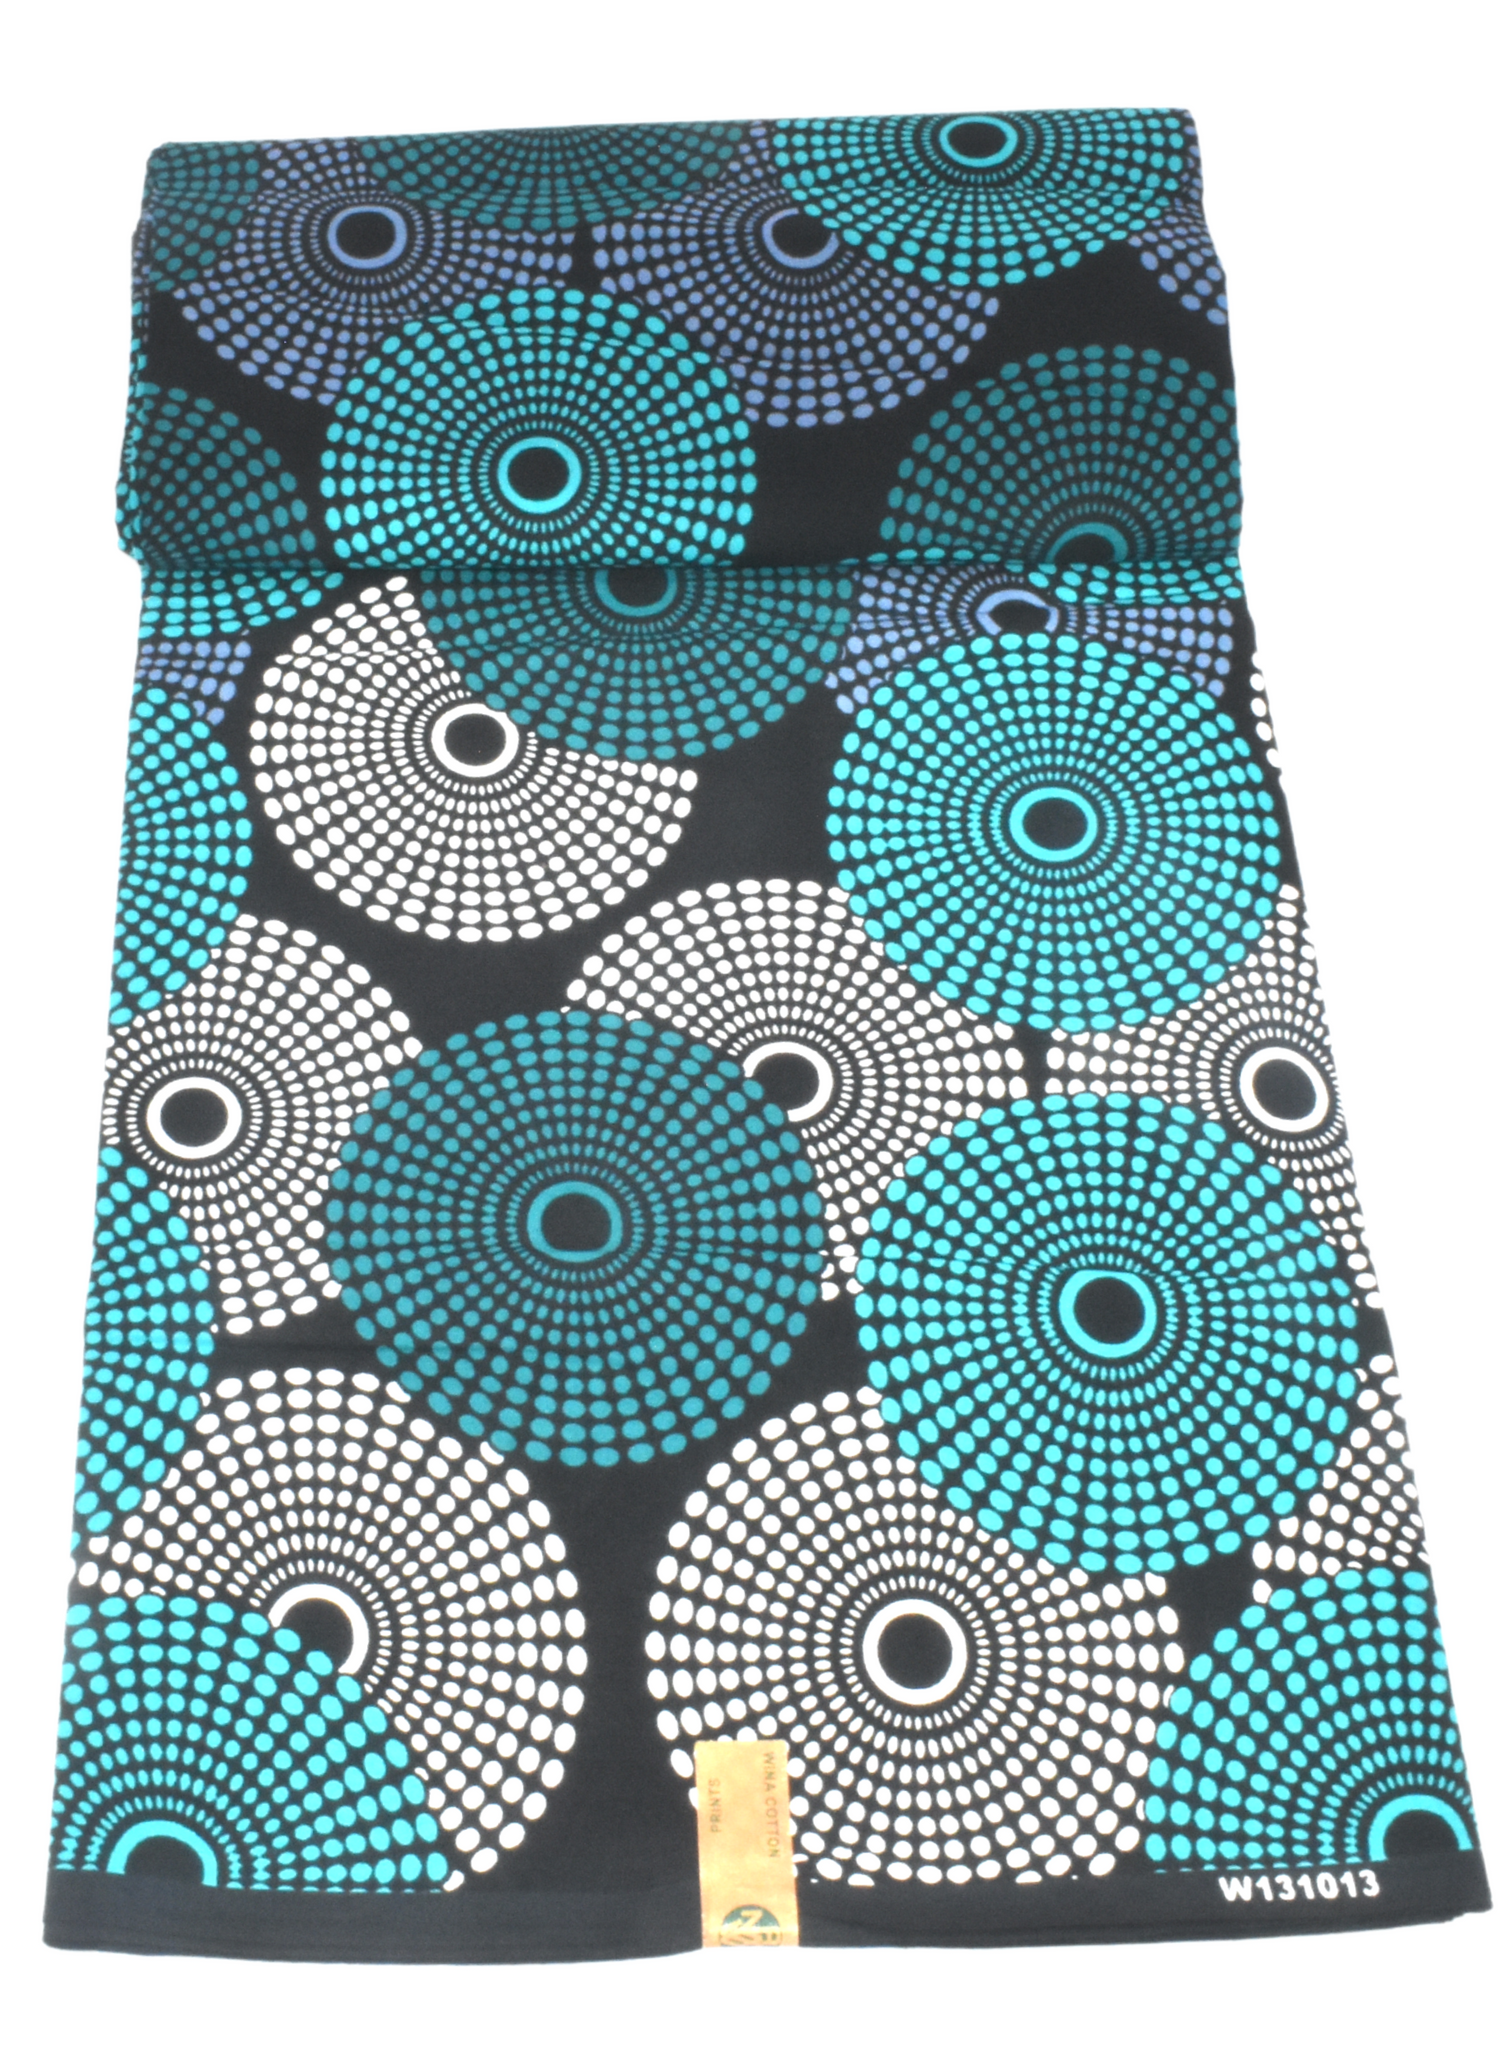 Circle of life teal, white and black african print 